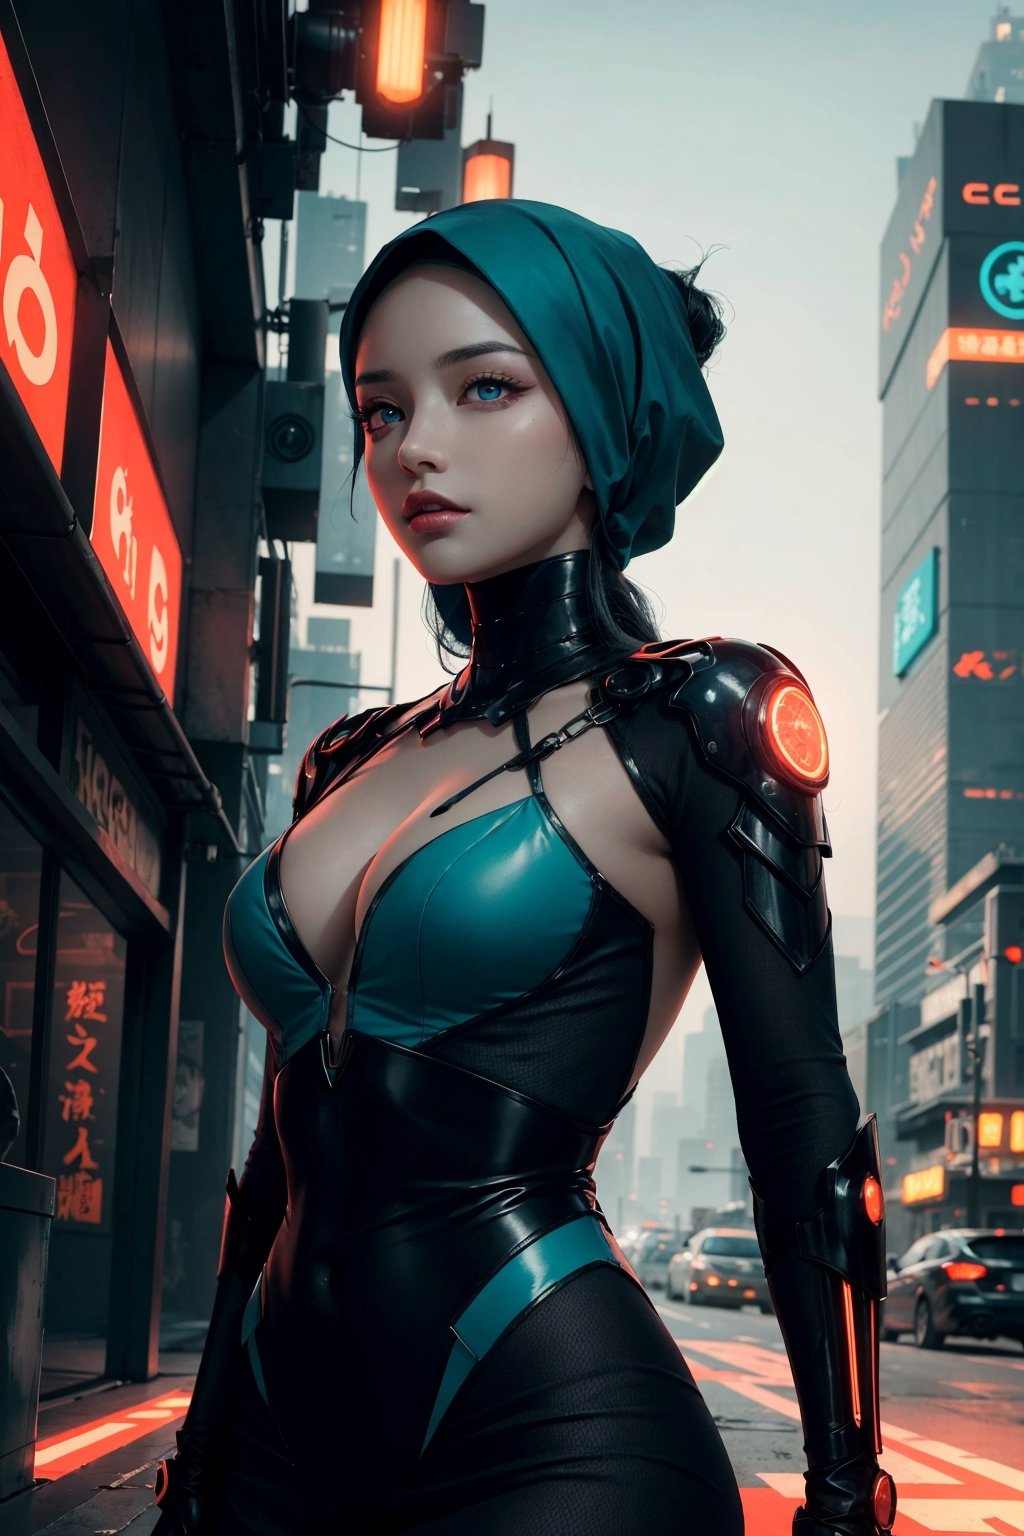 beautiful girl,wearing hijab,futuristic,cyberpunk,from future,action,elegance,beauty,glowing eyes,lights,high contrast,masterpiece,teal and orange,raidenshogundef,muted colors,low colors,